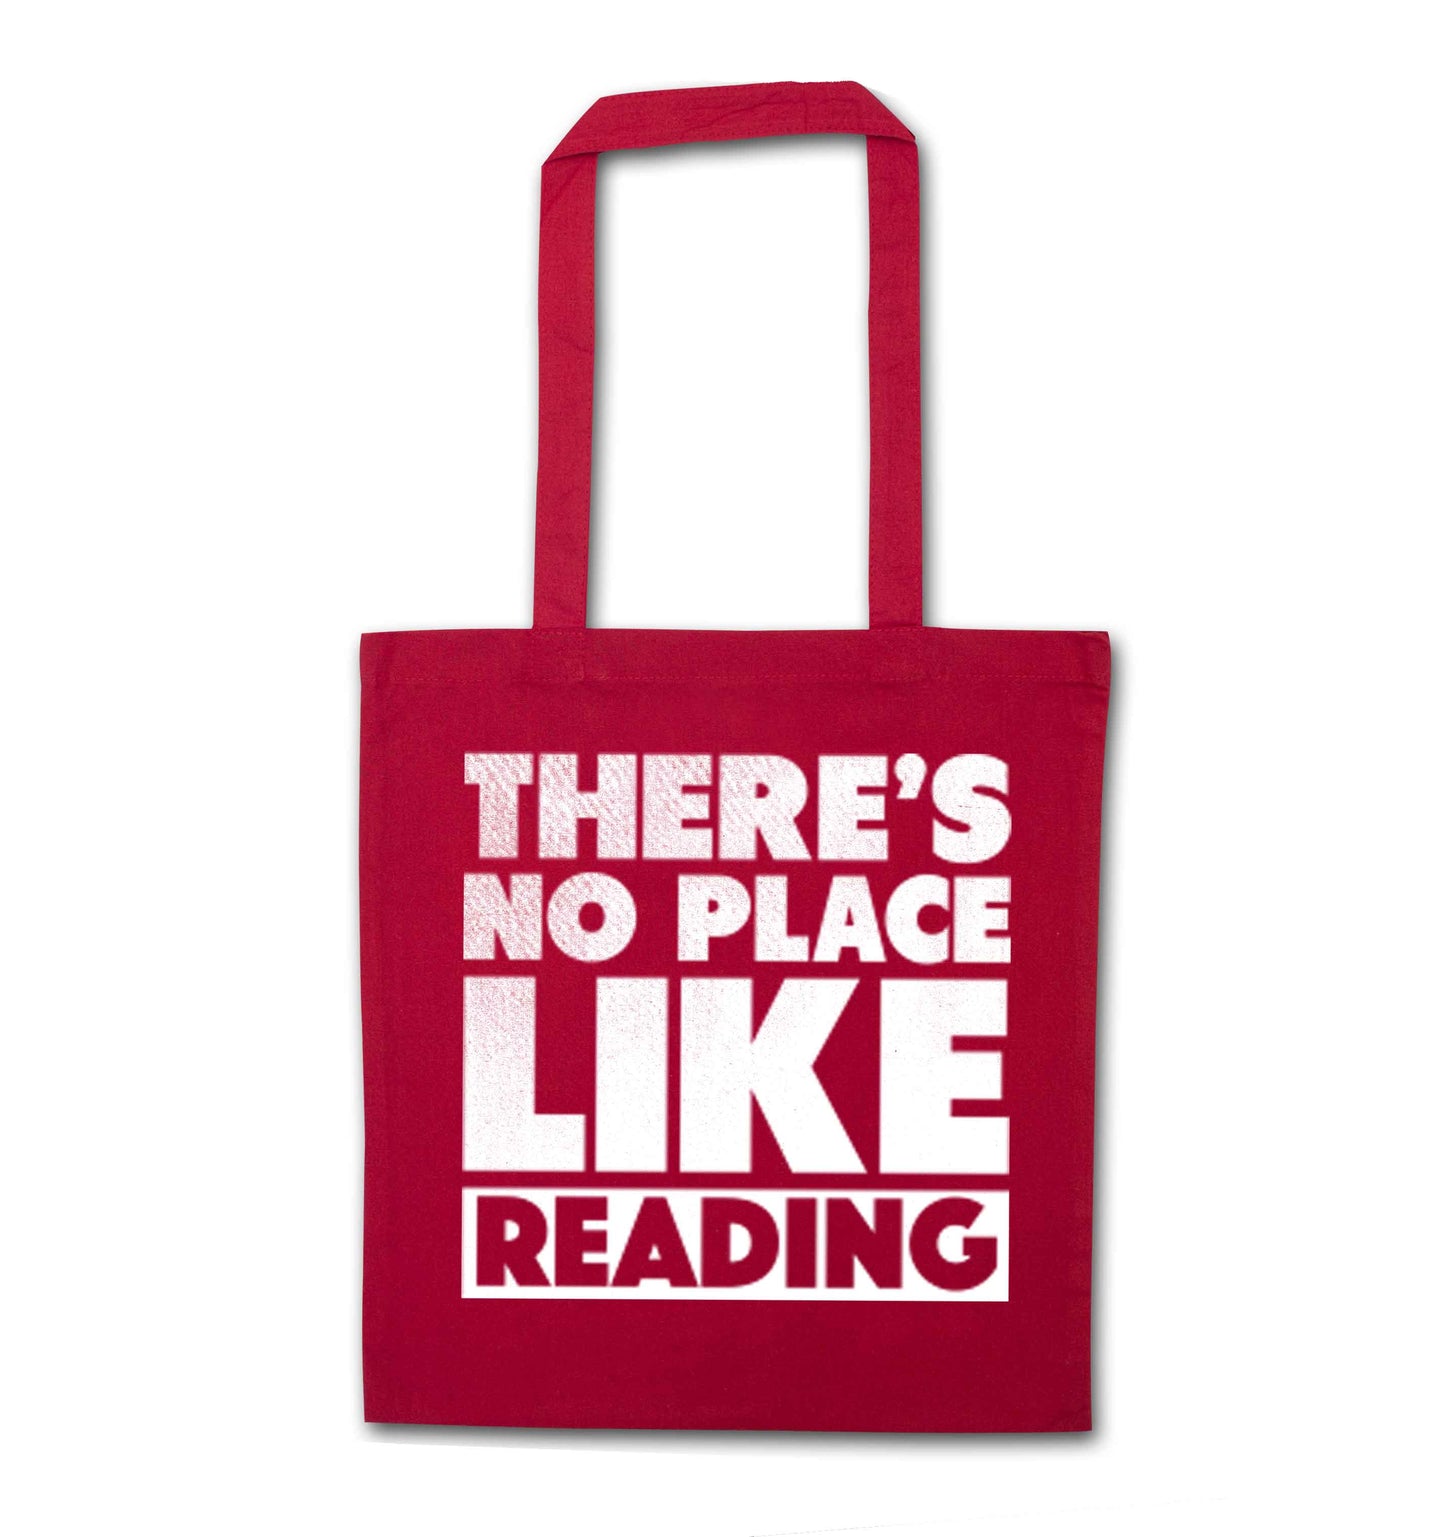 There's no place like Readingred tote bag